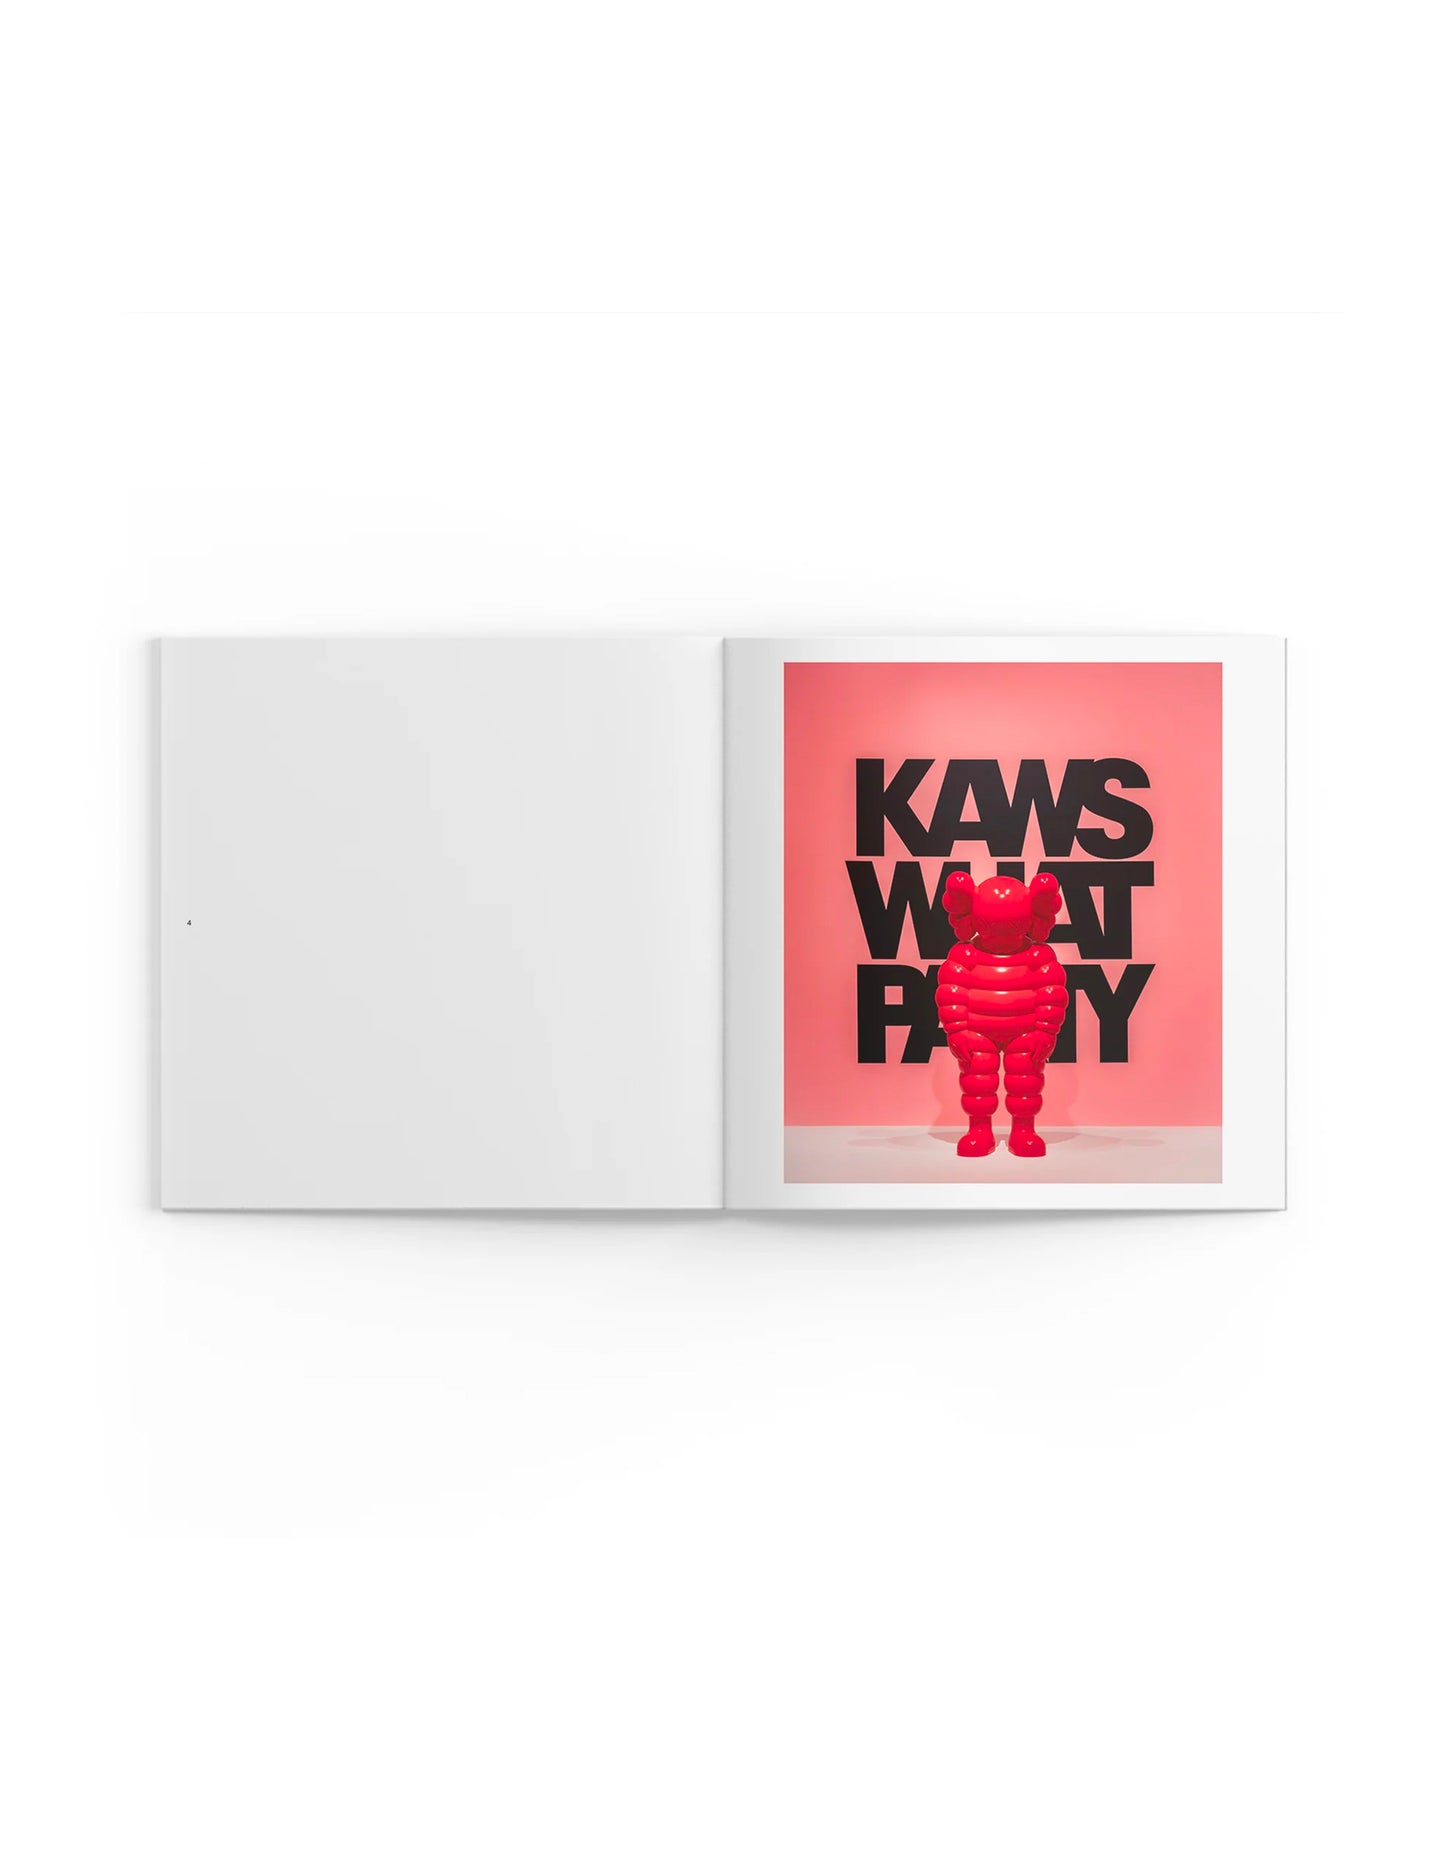 KAWS - What Party Booklet